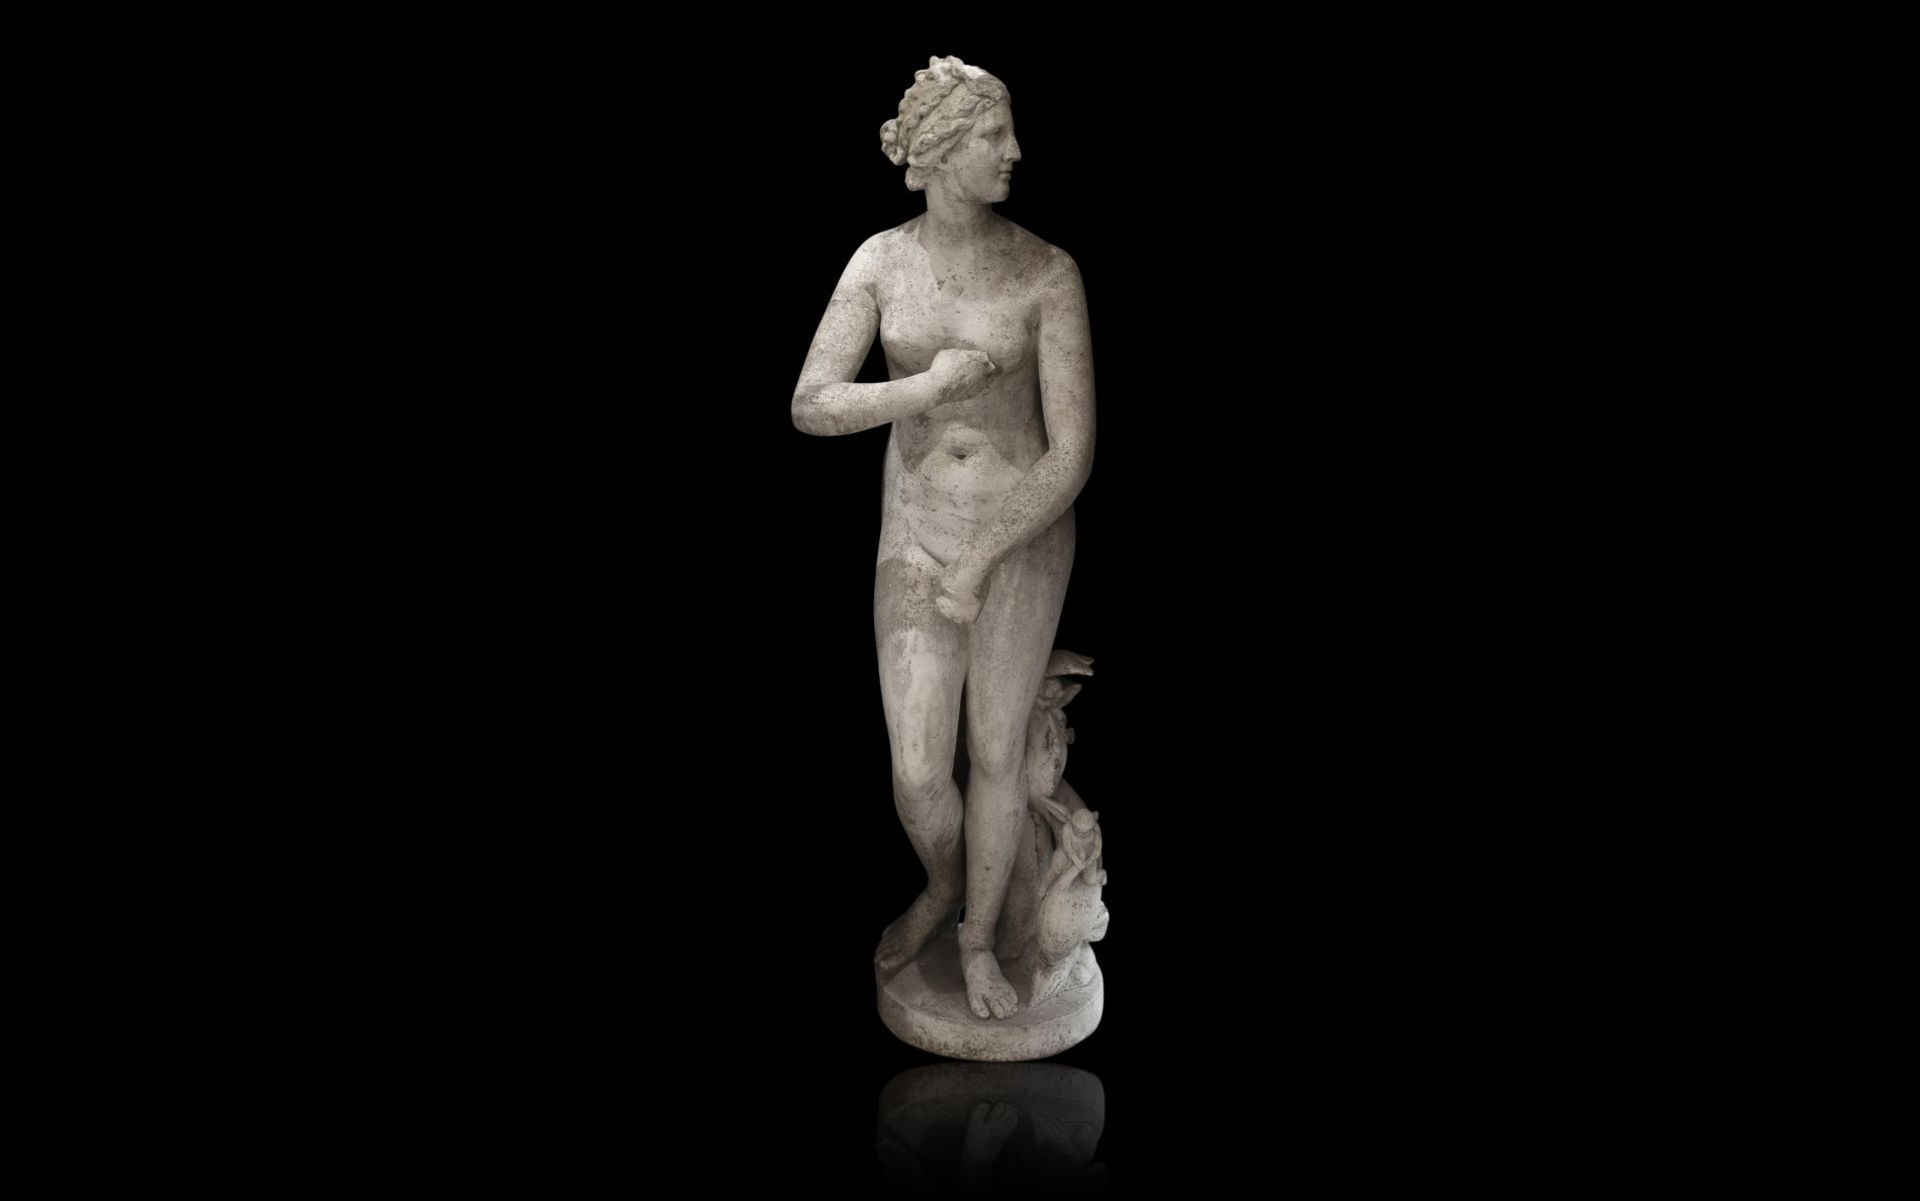 A LIFE-SIZE 19TH CENTURY MARBLE FIGURE OF THE MEDICI VENUS